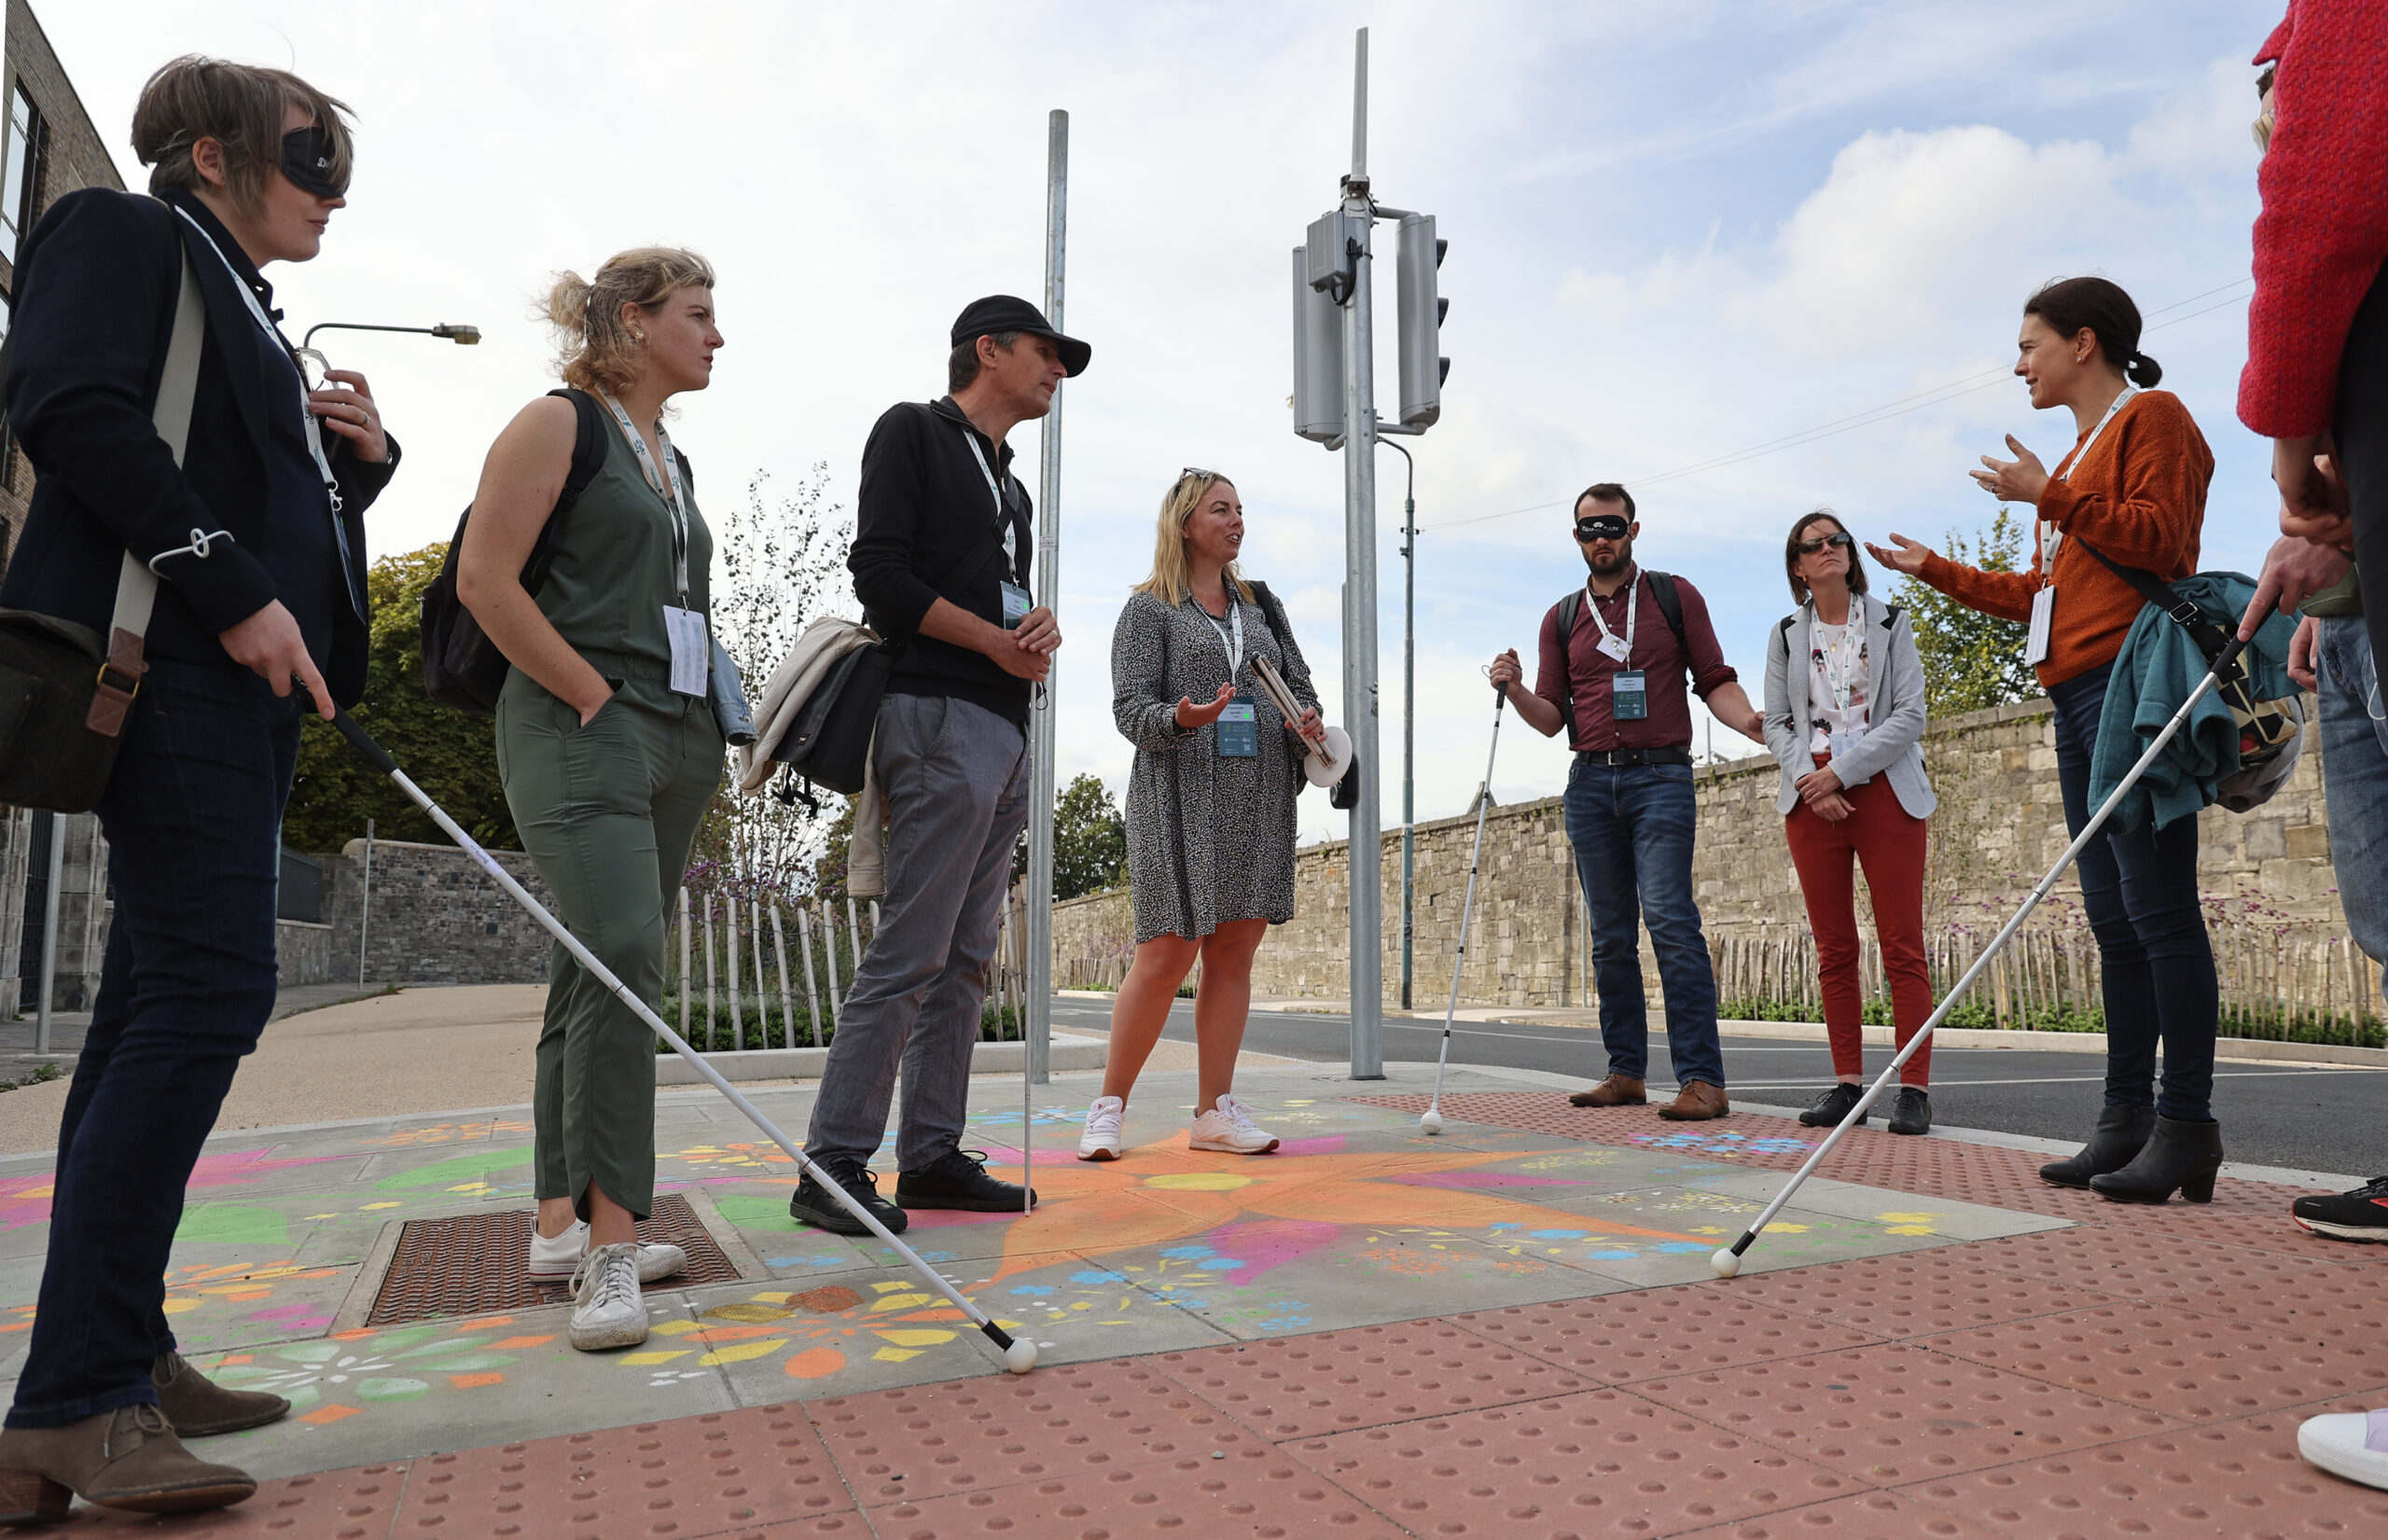 Possibility Labs' Chantelle Smith is standing at a section of tactile paving with a group of people. Some of those people are wearing blindfolds and are using white canes to experience what it is like to navigate the built environment like a person who is blind or vision impaired. Picture credit: Nick Bradshaw.